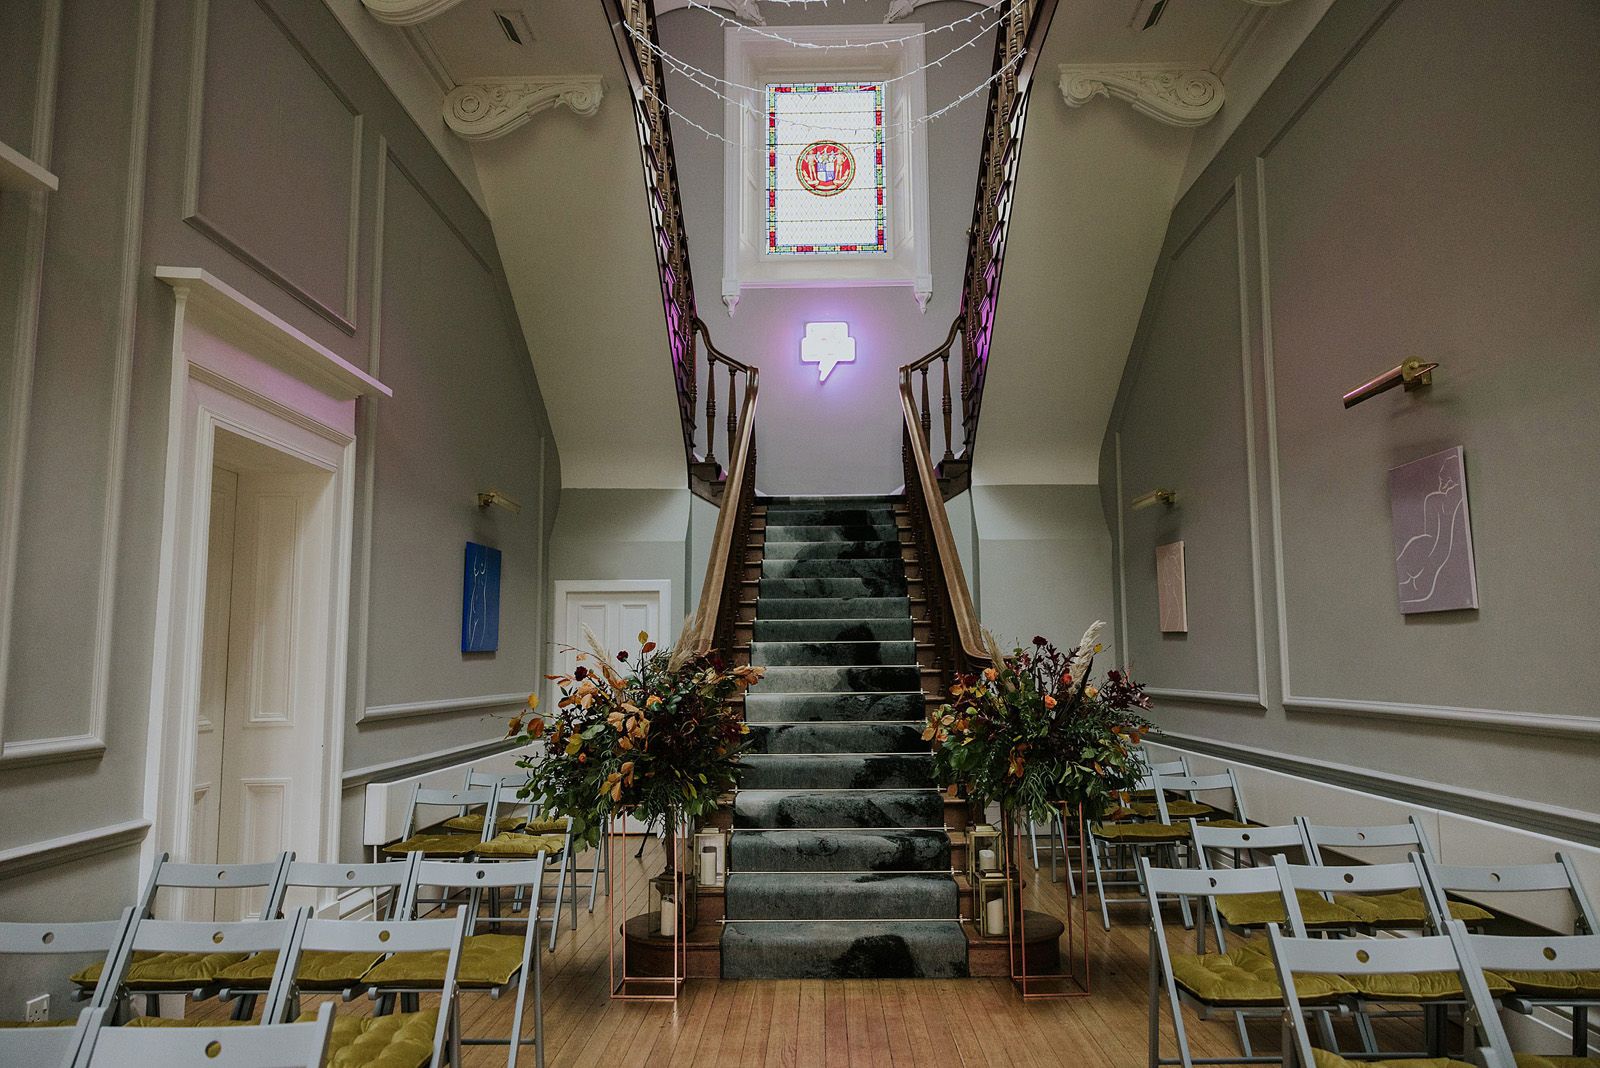 neterbyres house wedding venue grand hall set up with chairs and floral decor for ceremony